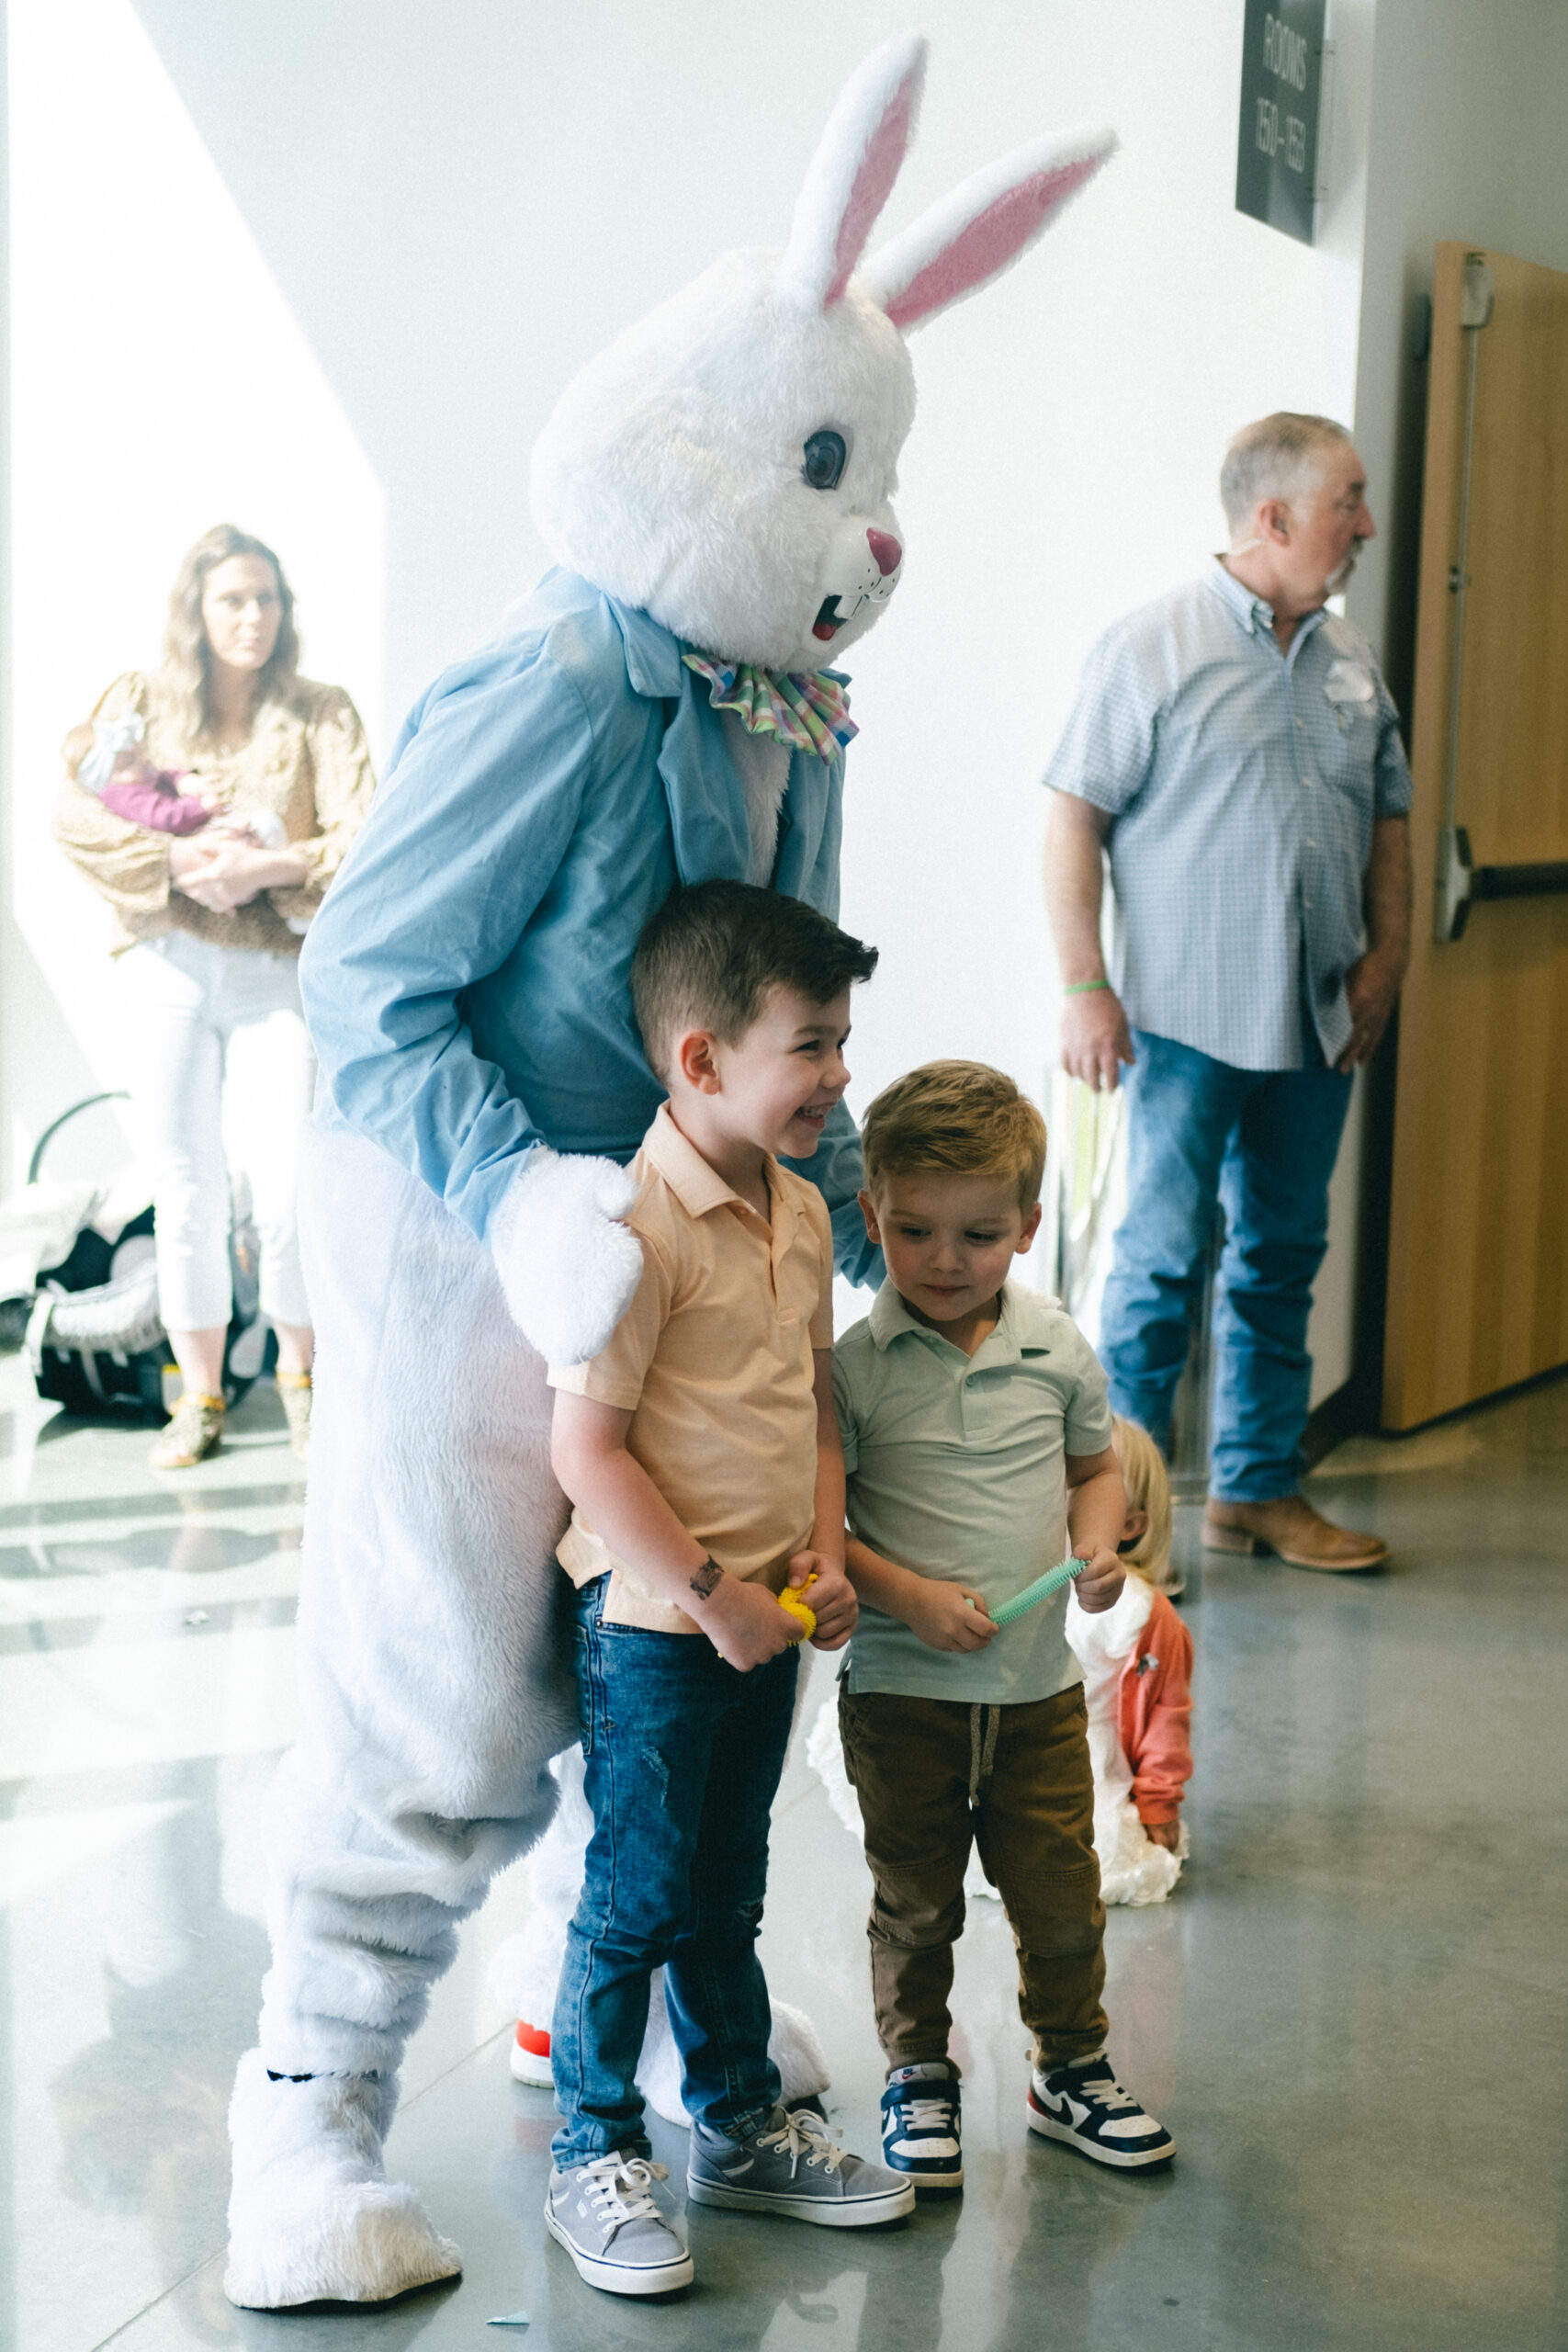 Easter Bunny posing for pictures with two children.